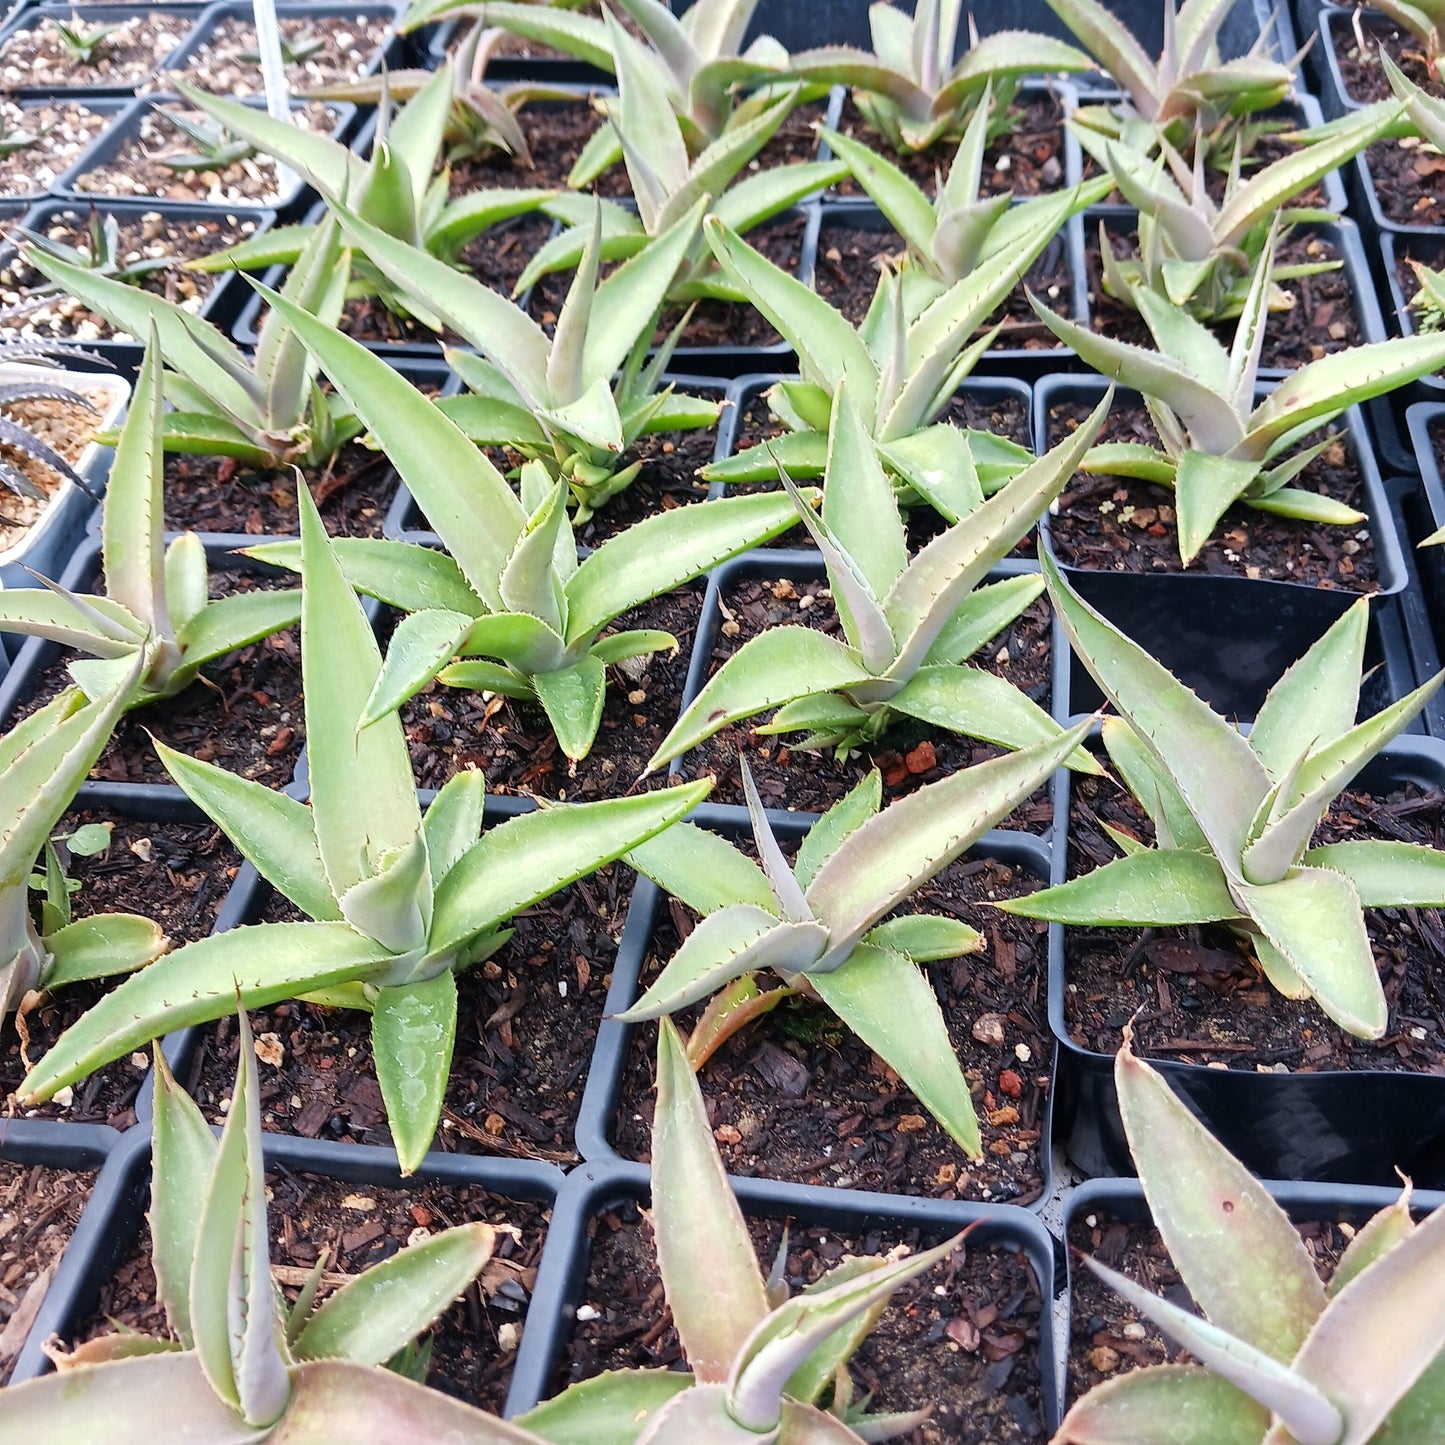 many Agave guiengola "Platinum" in 4in nursery pots